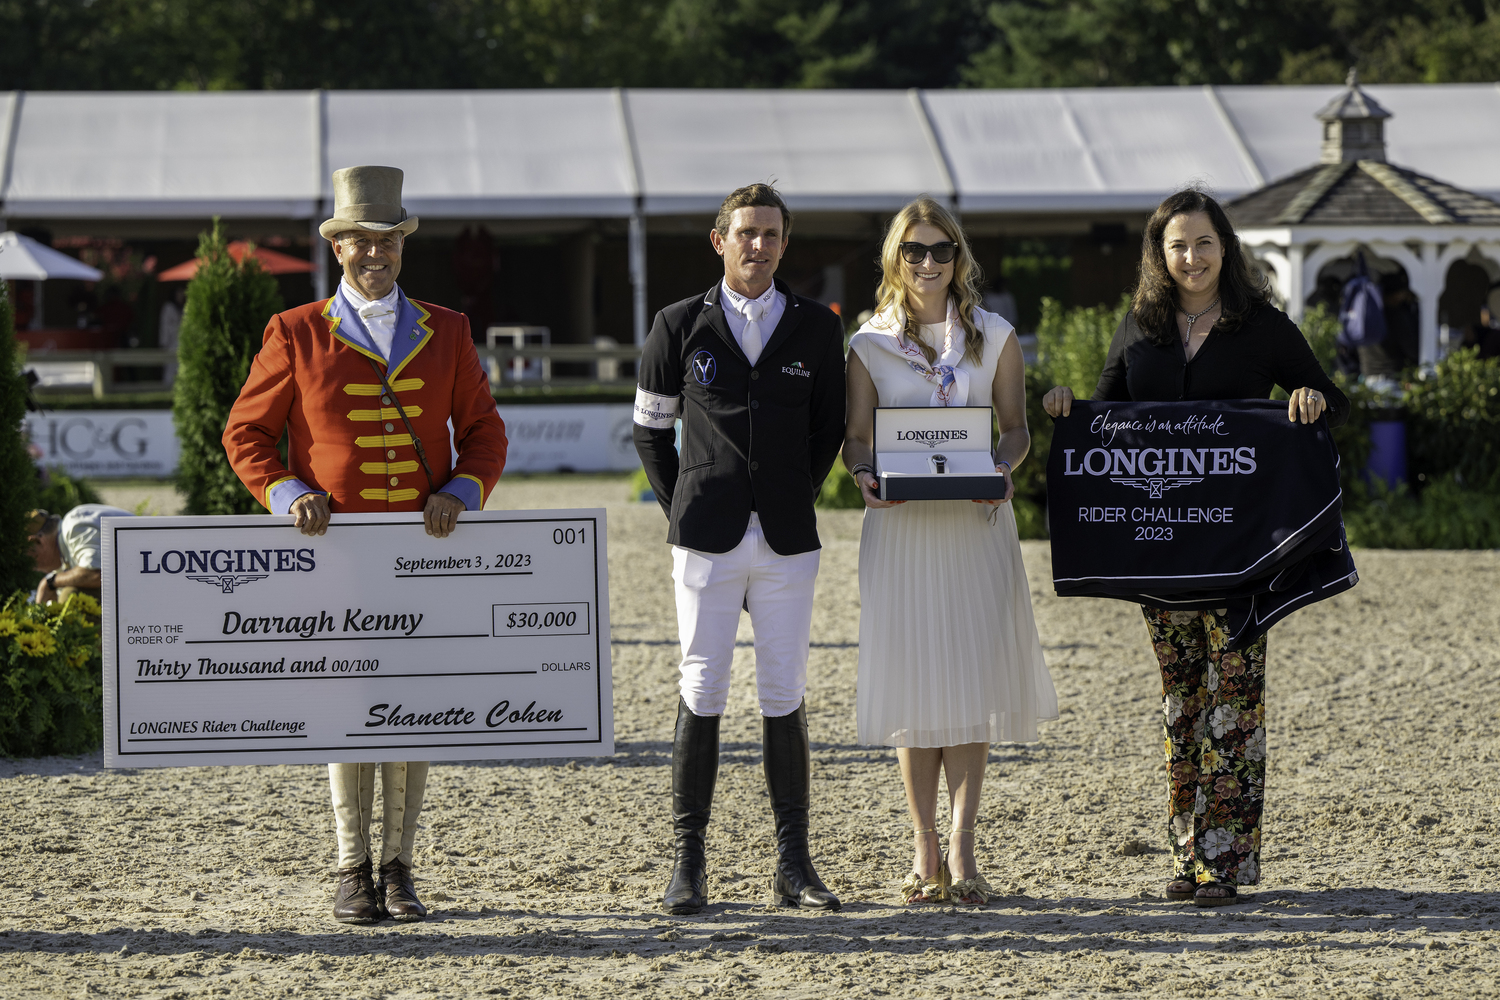 Irish rider Darragh Kenny won the Longines Rider Challenge for accumulating the most points throughout the week in the open jumper classes at the Classic. MARIANNE BARNETT